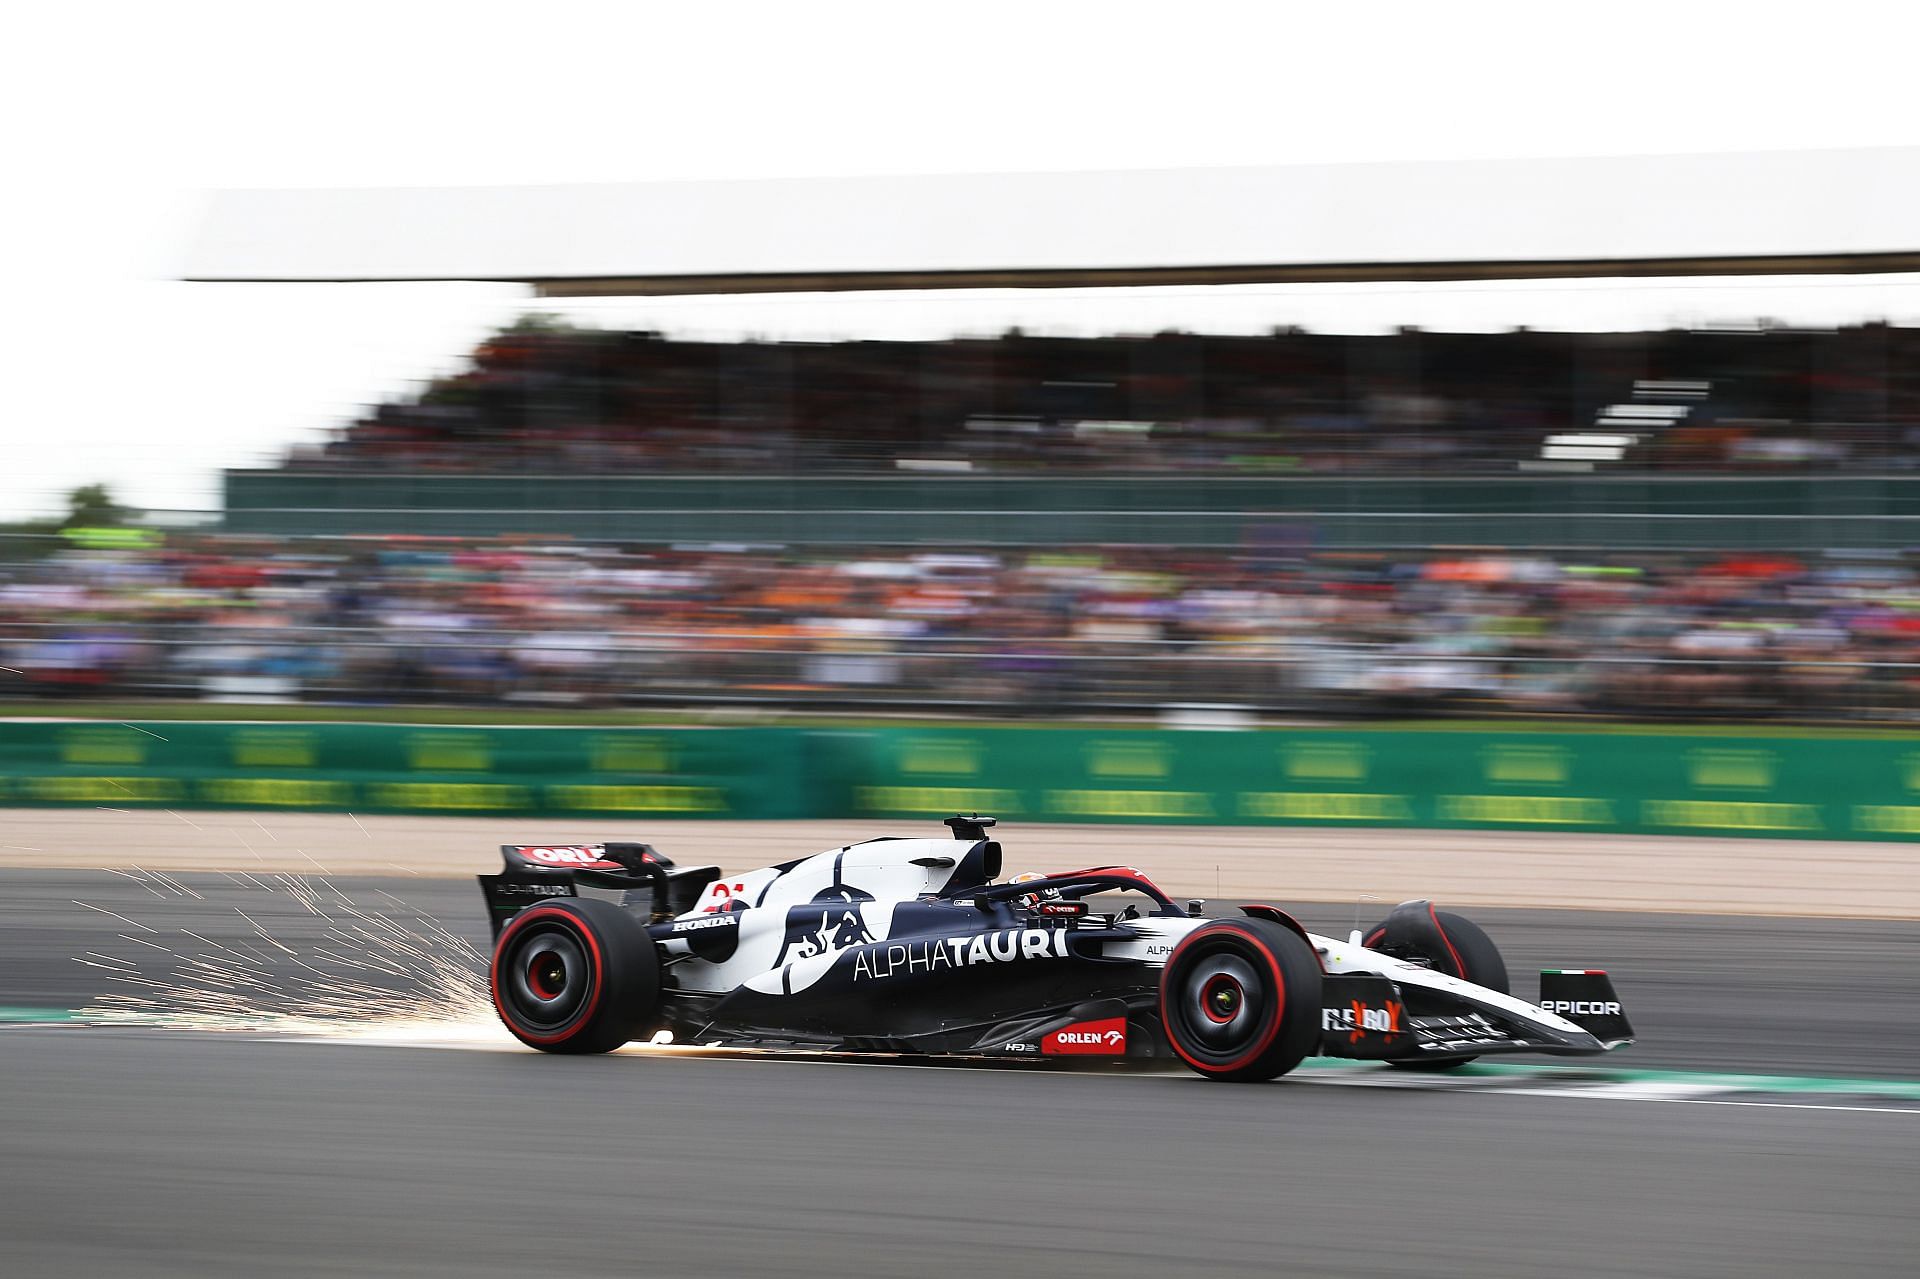 Nyck de Vries in the AlphaTauri at Silverstone (British GP, 2023) (Photo by Peter Fox/Getty Images)